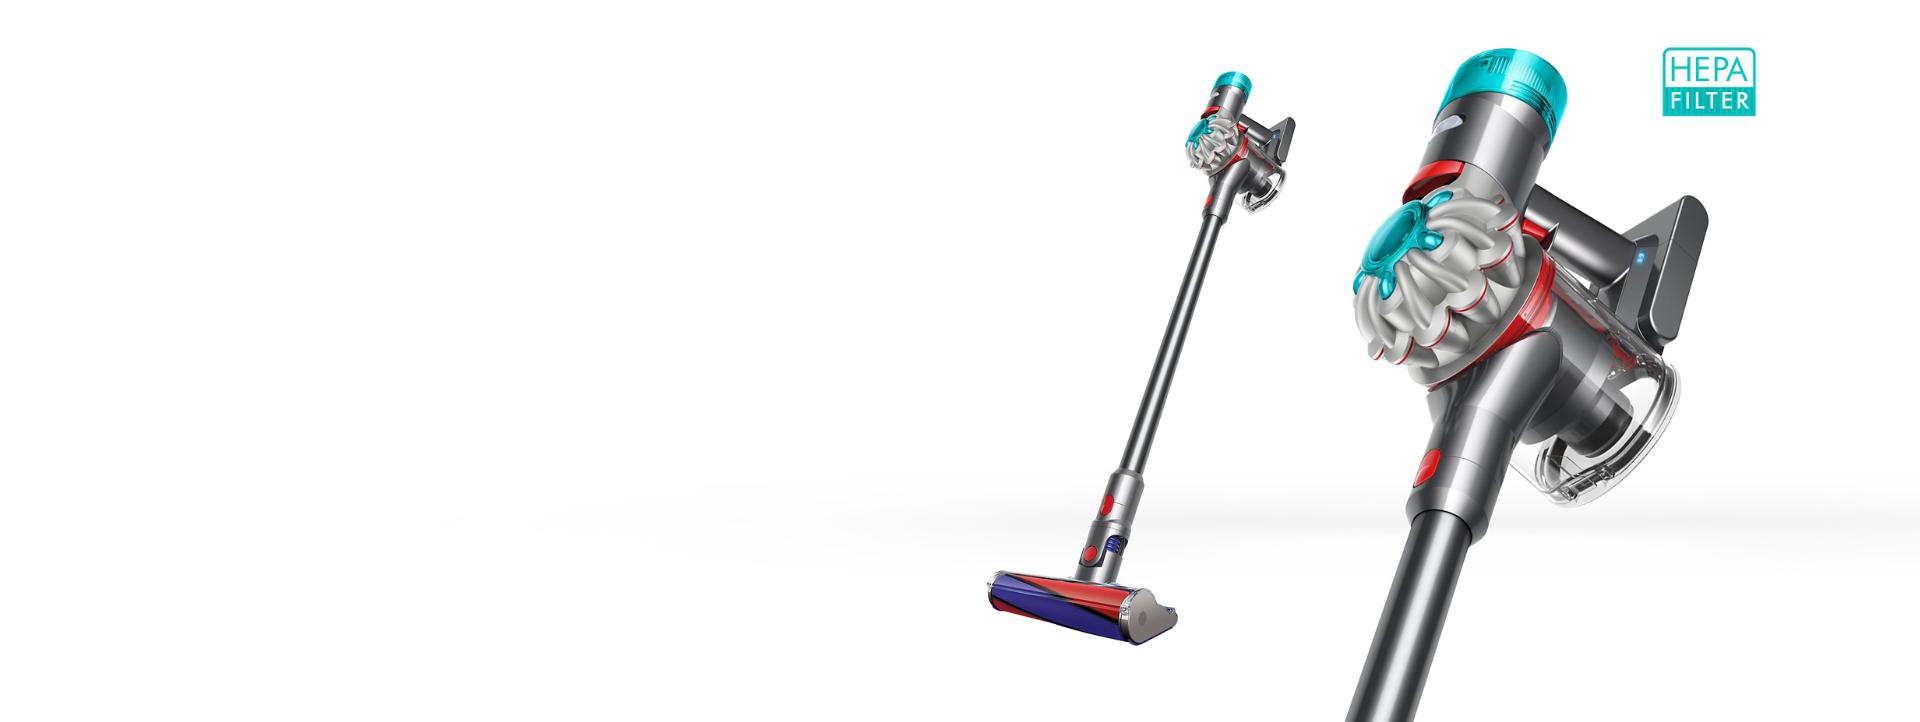 Dyson V8 absolute vacuum with HEPA filter